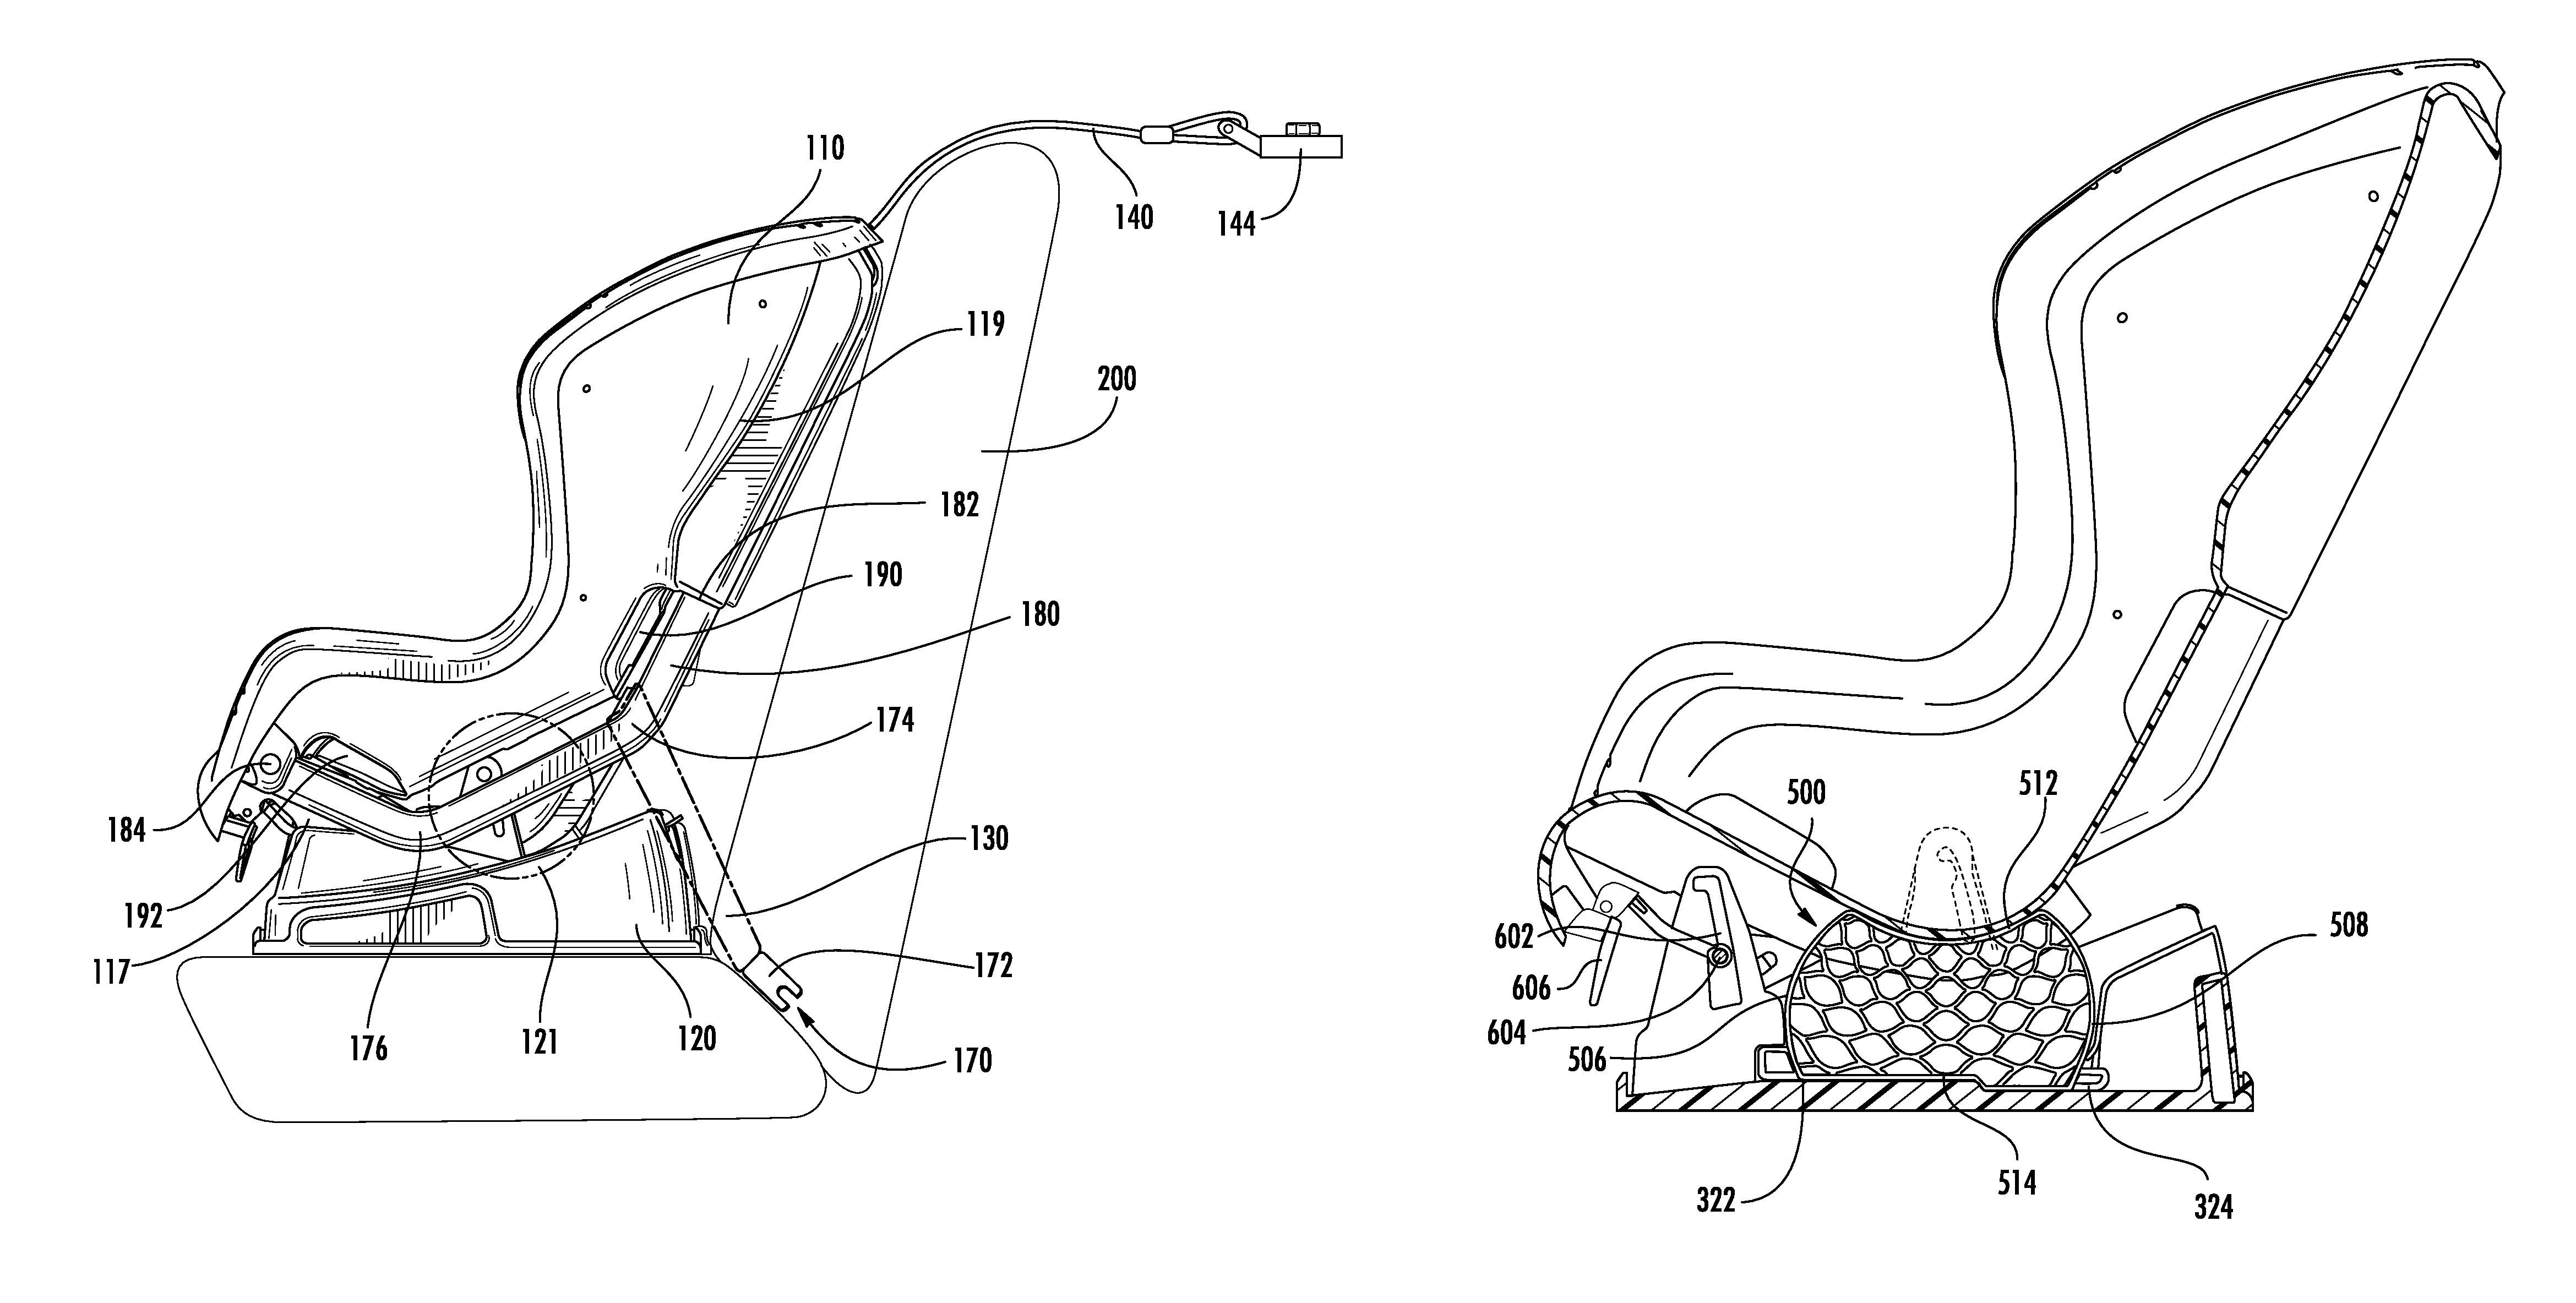 Child safety seat with energy absorbing apparatus